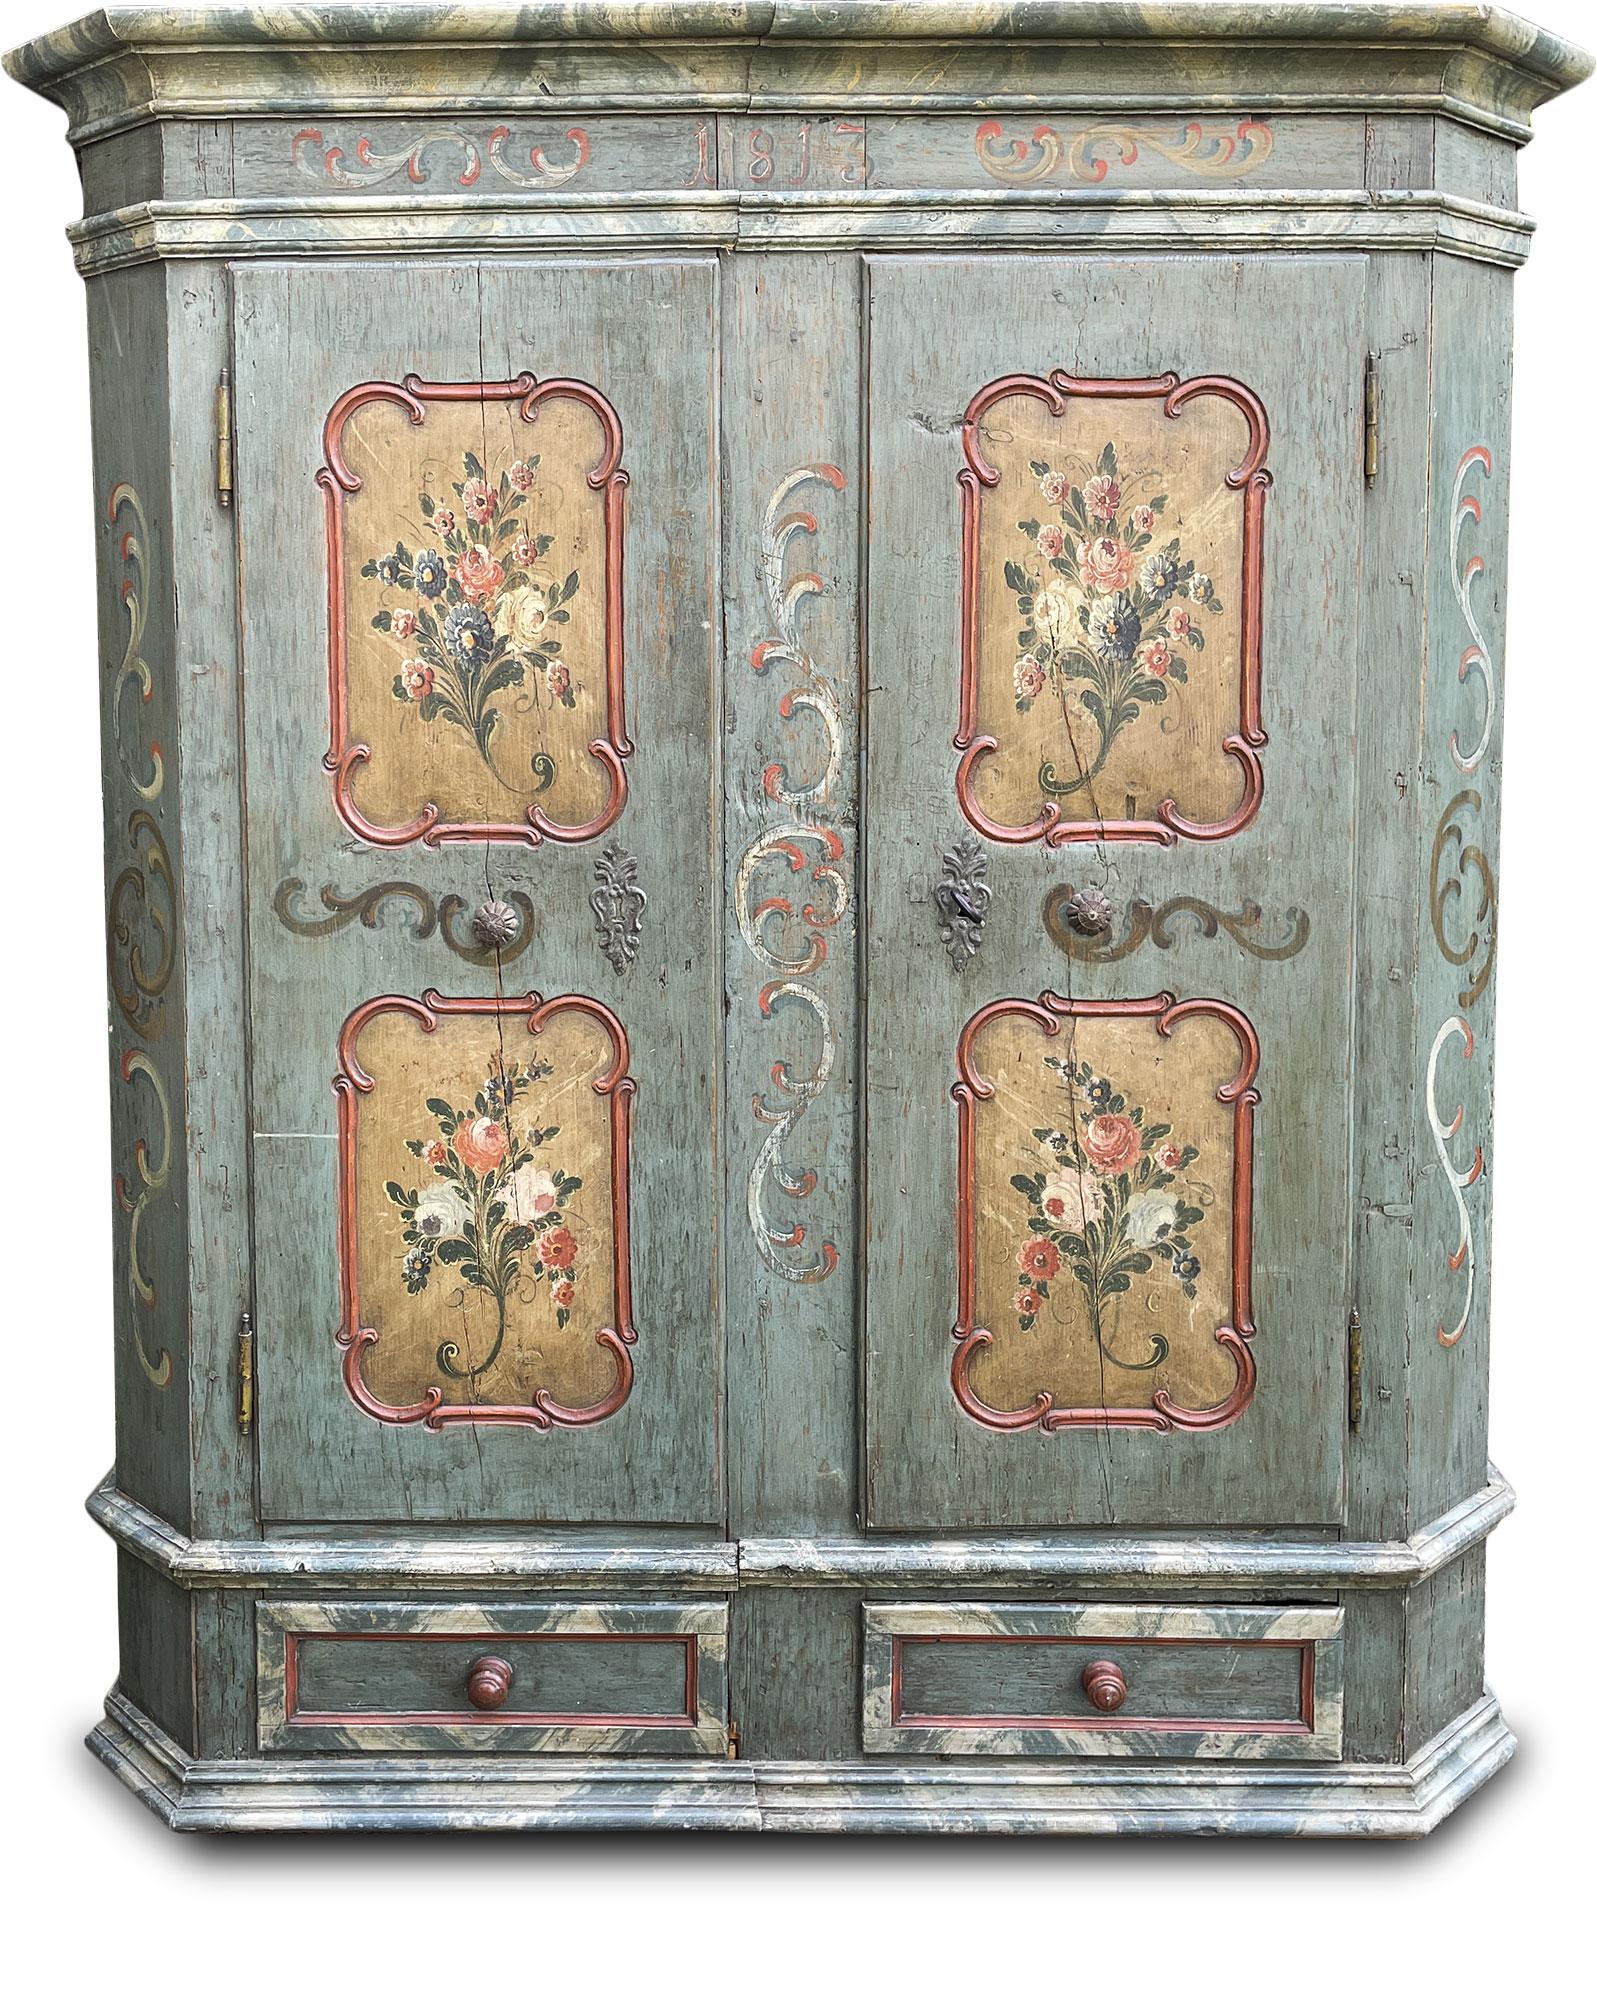 Tyrolean painted cabinet 1813.

Measures: H. 178cm - L. 145cm (158cm to the frames) - P. 47cm (55cm to the frames).

Tyrolean painted wardrobe with two doors and two drawers, entirely painted in blue / green. Ramages and faux marble motifs are